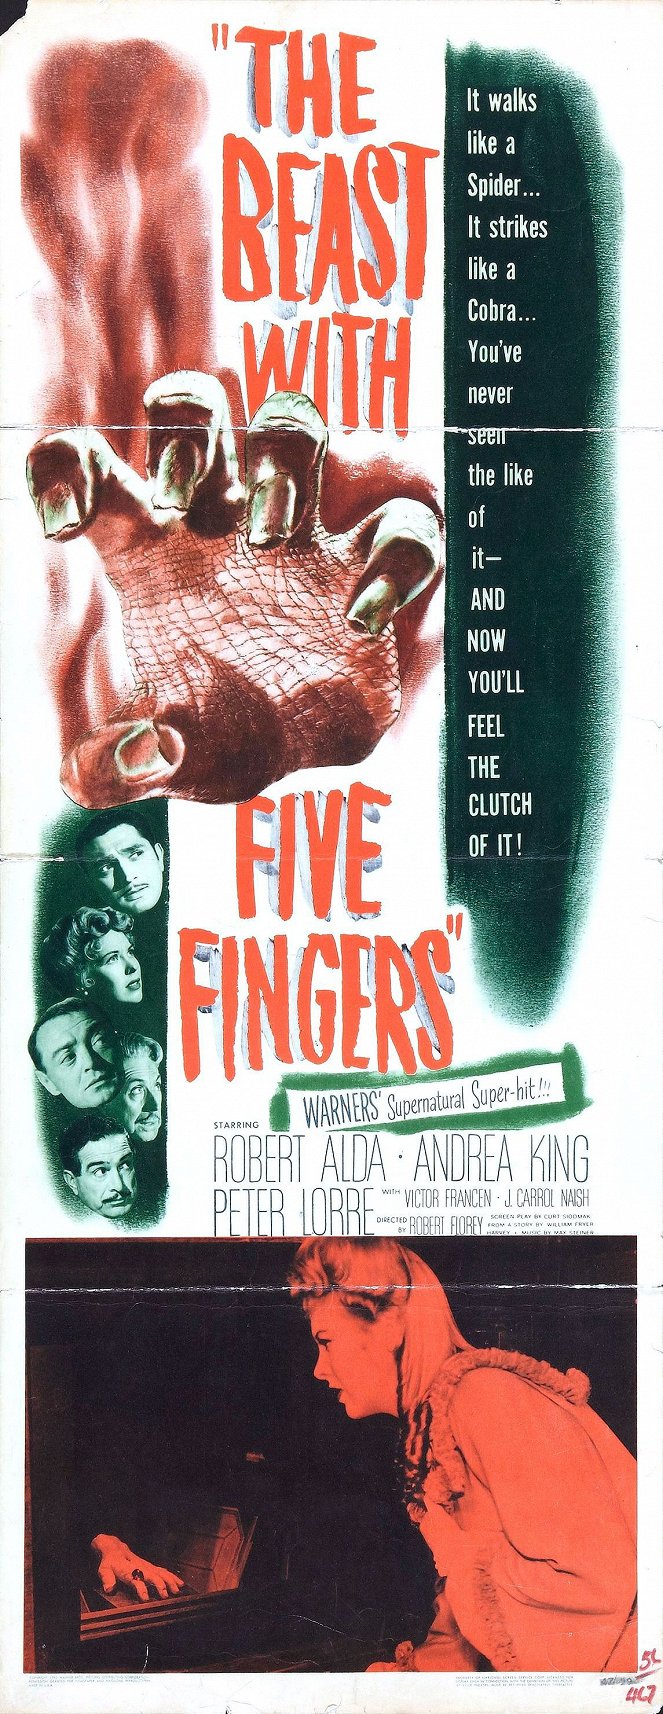 The Beast with Five Fingers - Posters